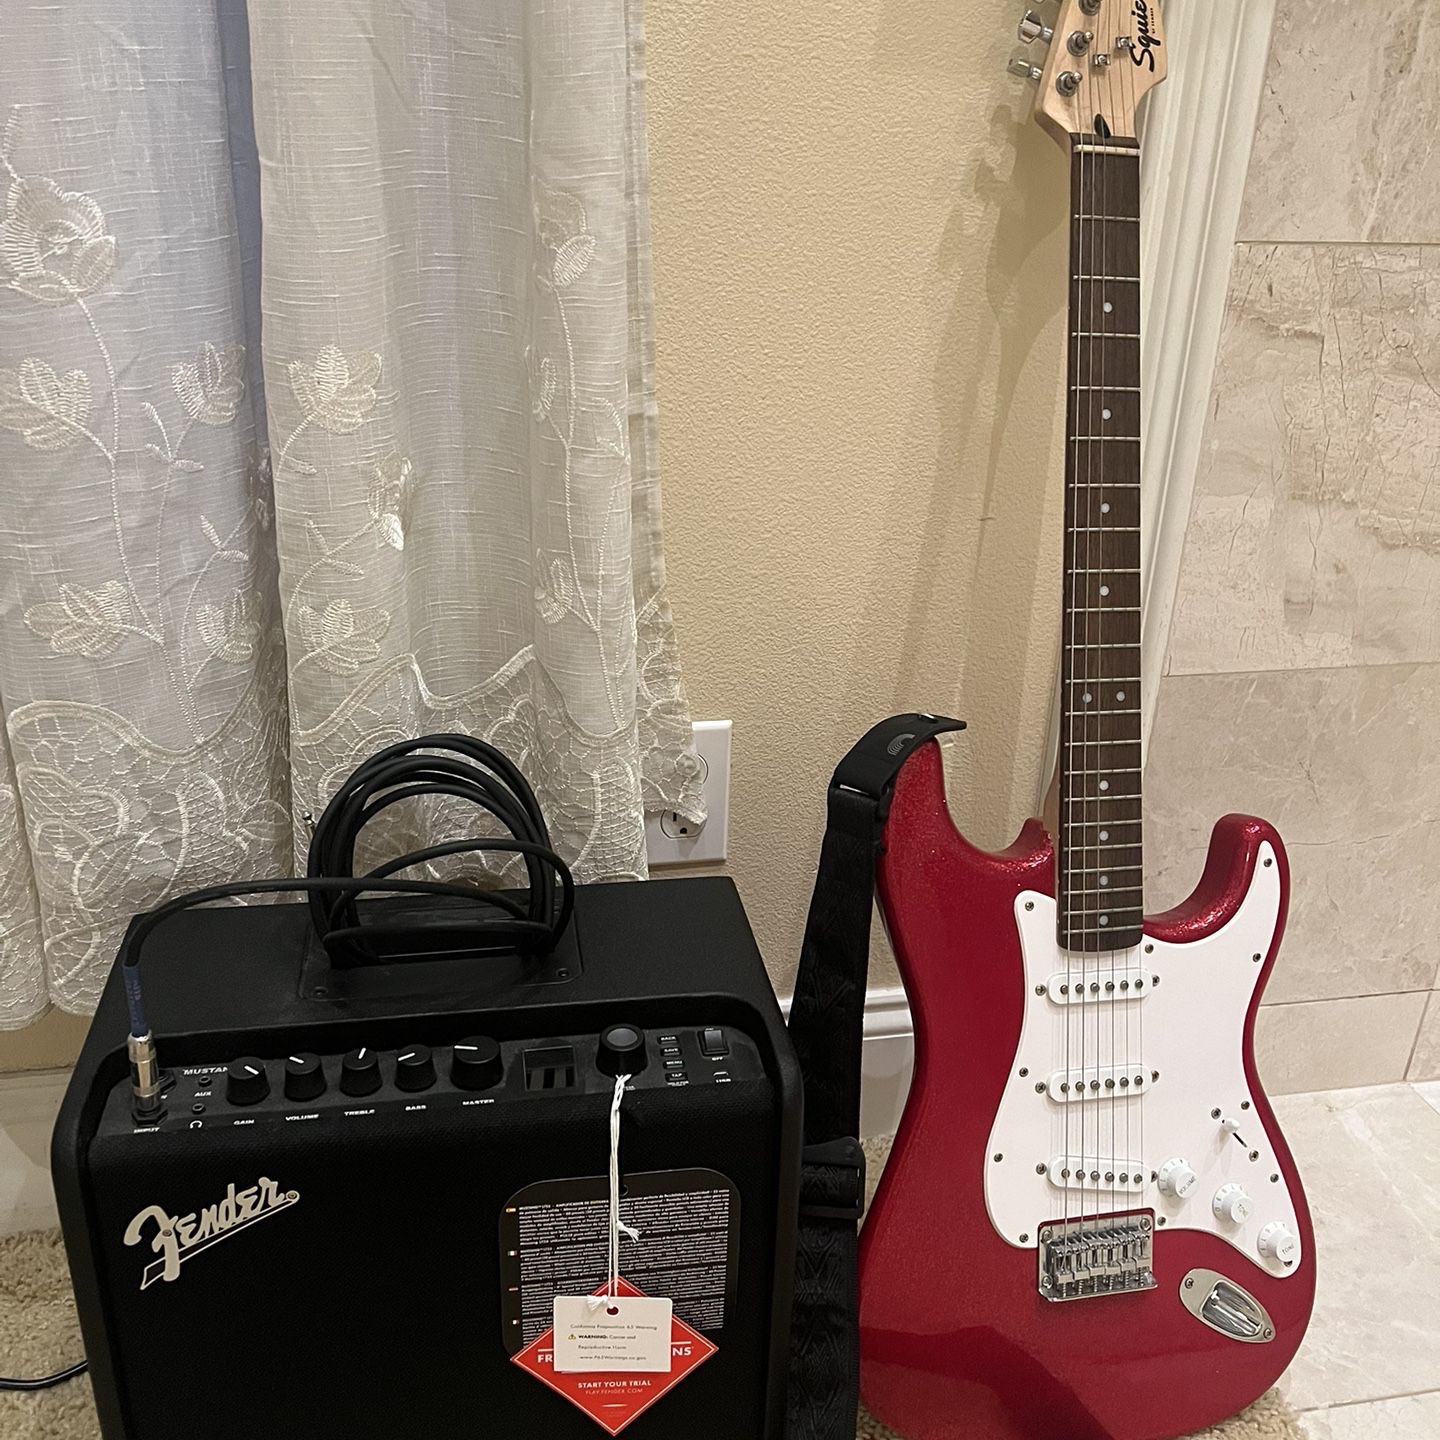 Guitar & Amp For Sale!